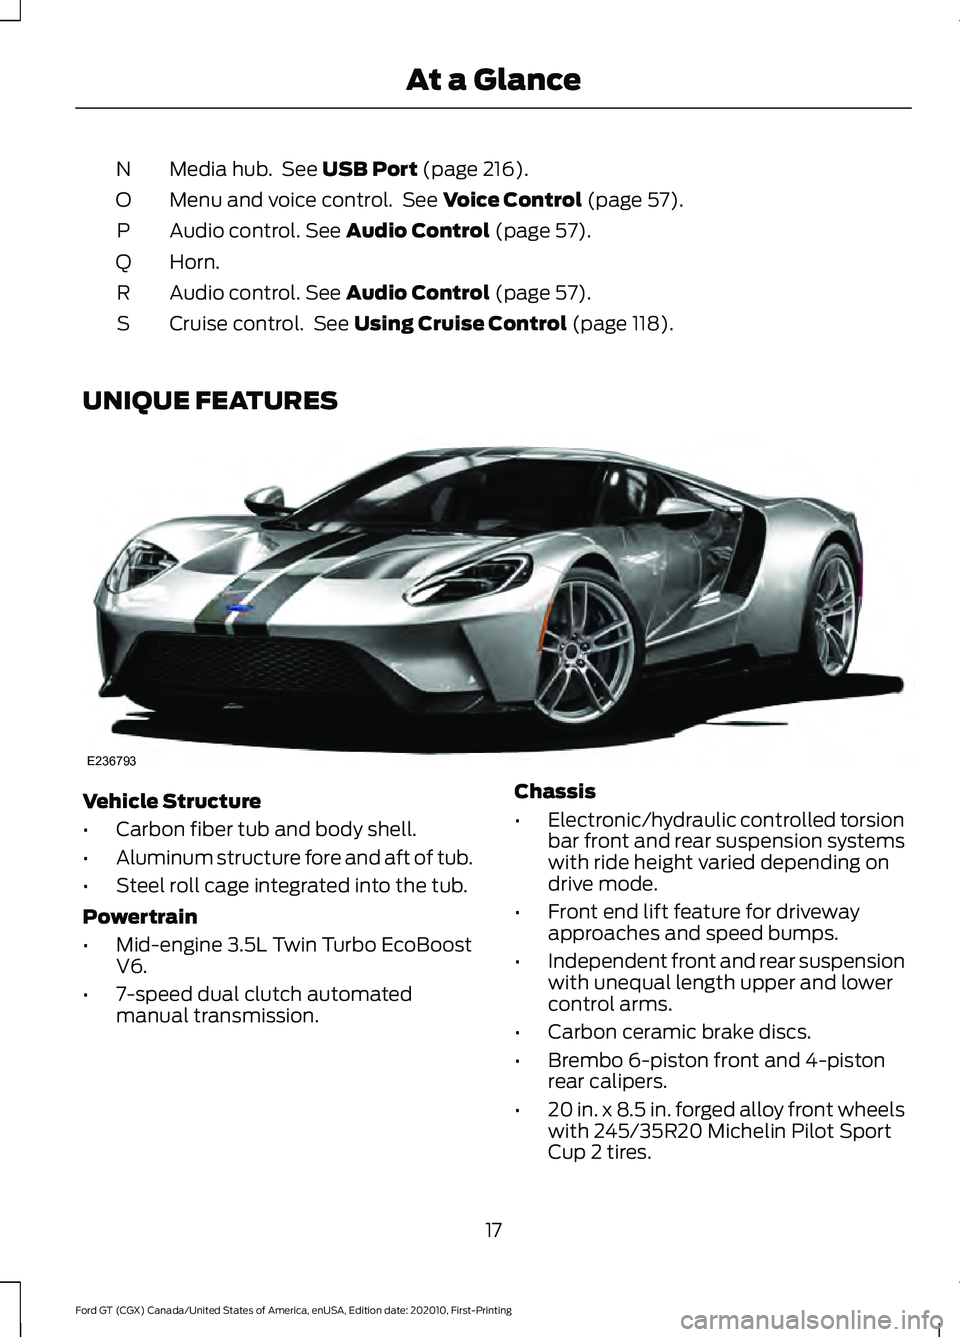 FORD GT 2021  Owners Manual Media hub.  See USB Port (page 216).
N
Menu and voice control.  See 
Voice Control (page 57).
O
Audio control.
 See Audio Control (page 57).
P
Horn.
Q
Audio control.
 See Audio Control (page 57).
R
Cr